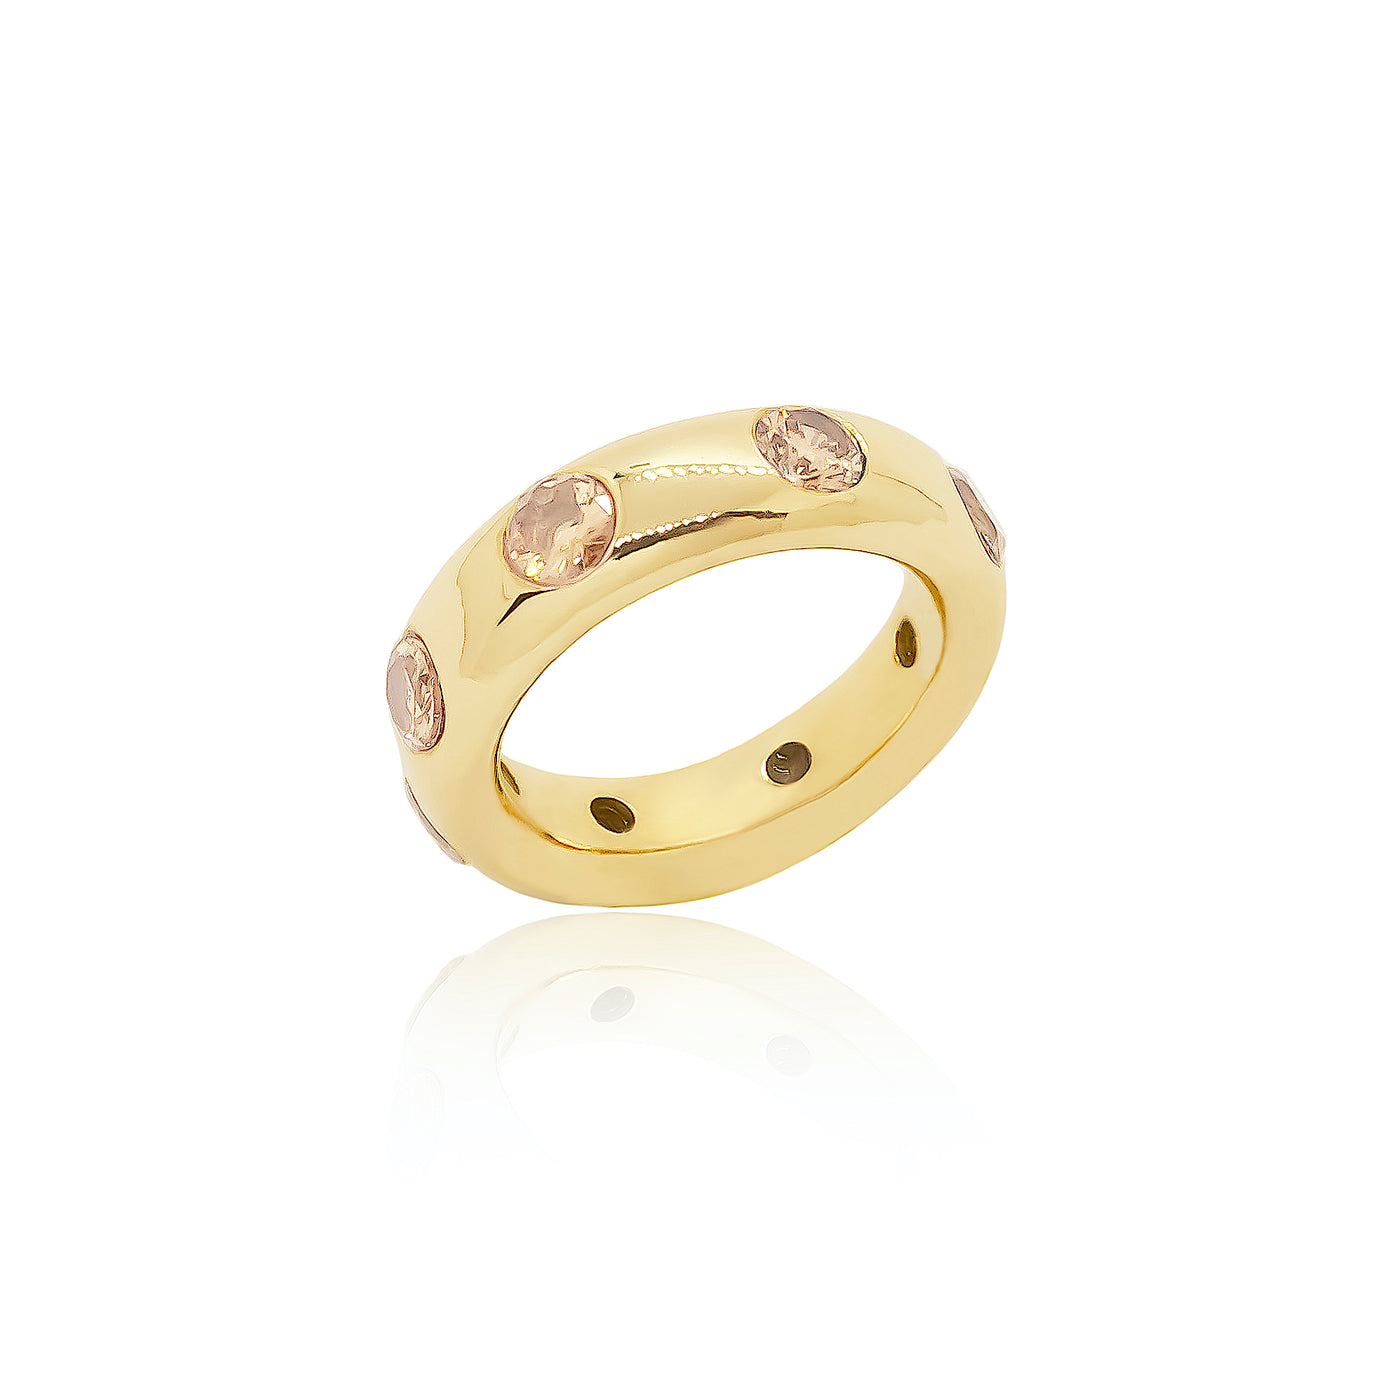 Infinity band ring in gold with champagne diamonds from Atelier ORMAN